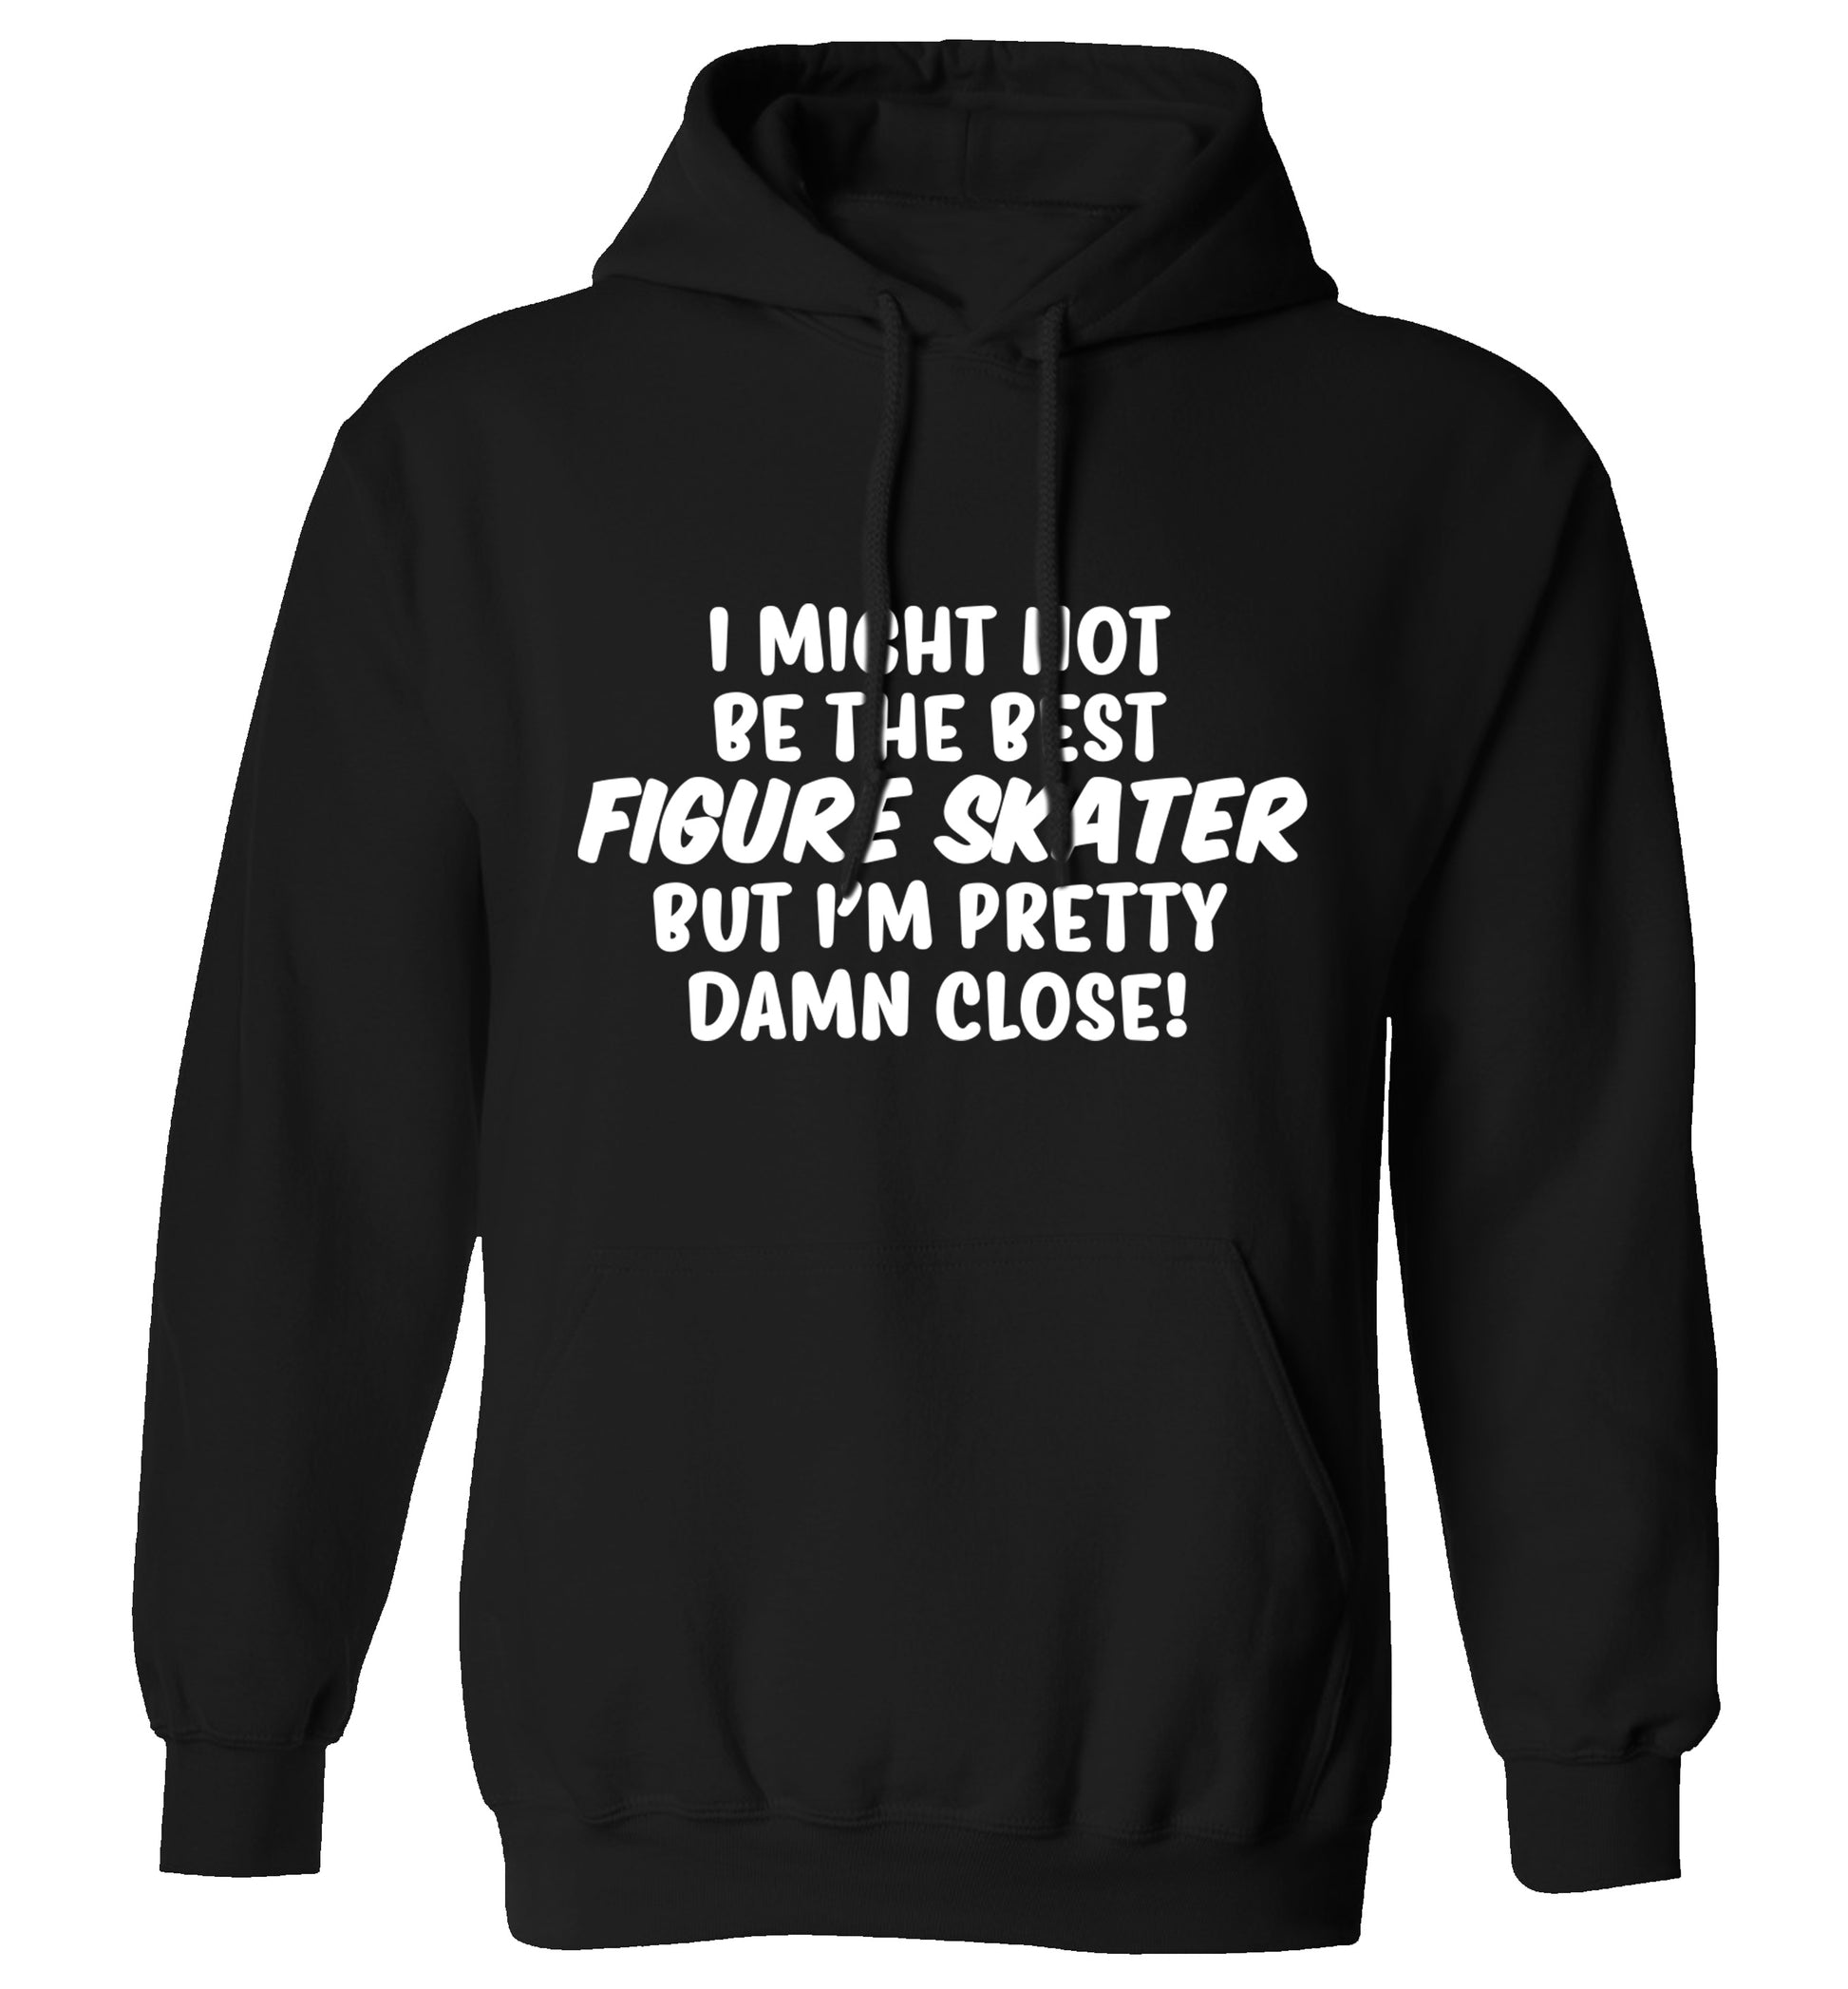 I might not be the best figure skater but I'm pretty damn close! adults unisexblack hoodie 2XL